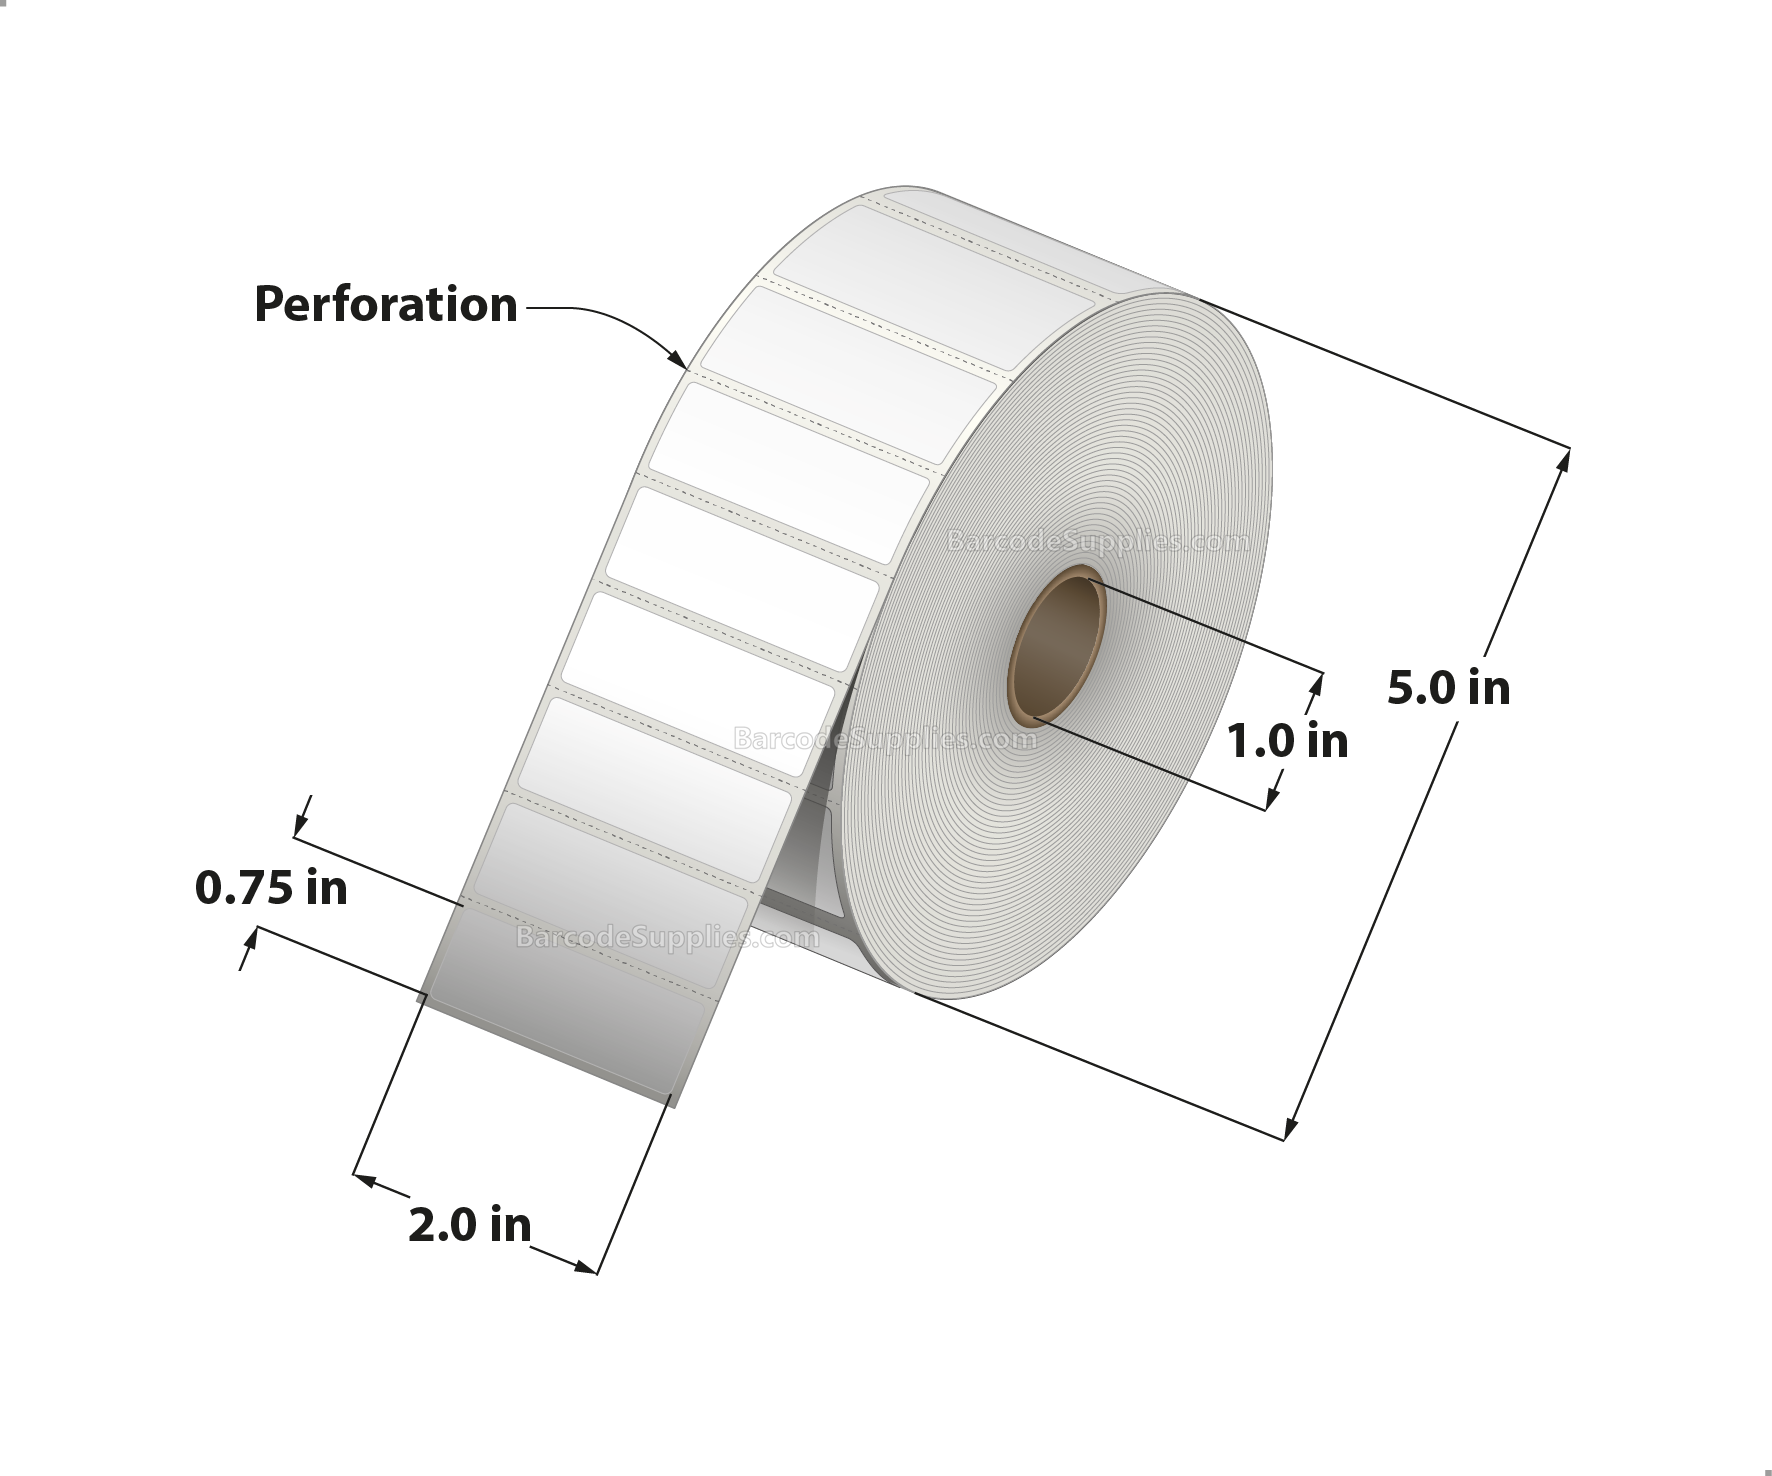 2 x 0.75 Thermal Transfer White Labels With Permanent Acrylic Adhesive - Perforated - 3000 Labels Per Roll - Carton Of 4 Rolls - 12000 Labels Total - MPN: TH275-1PTTPOLY